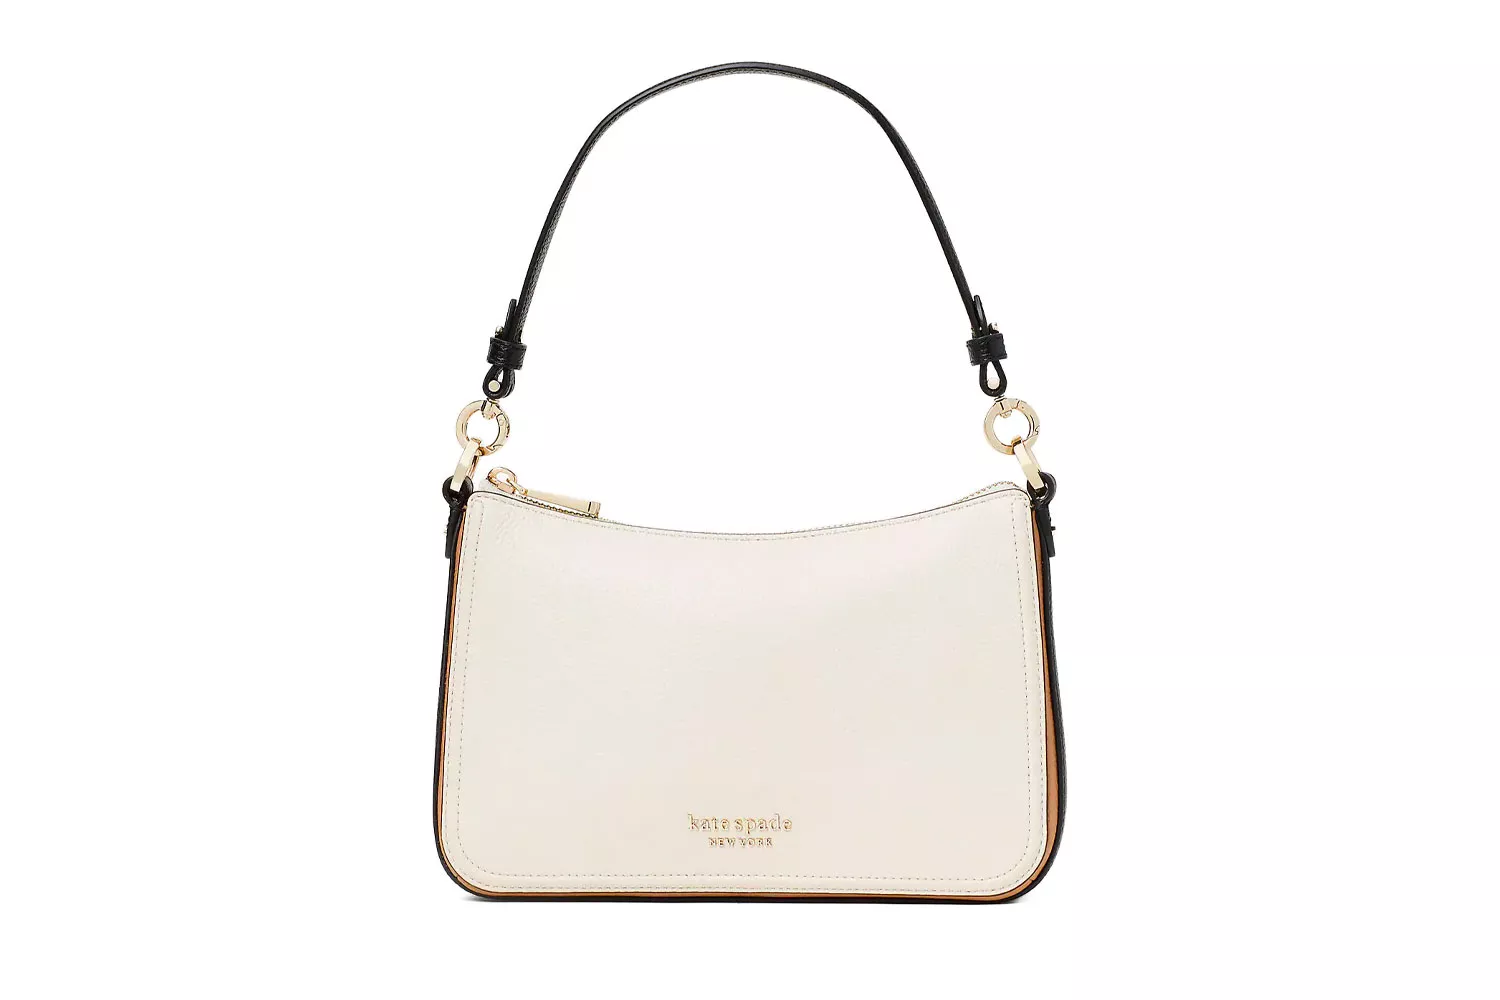 The Best Convertible Crossbody Bags that Make Your Busy Days Easier: Kate Spade Hudson Colorblocked Medium Convertible Crossbody